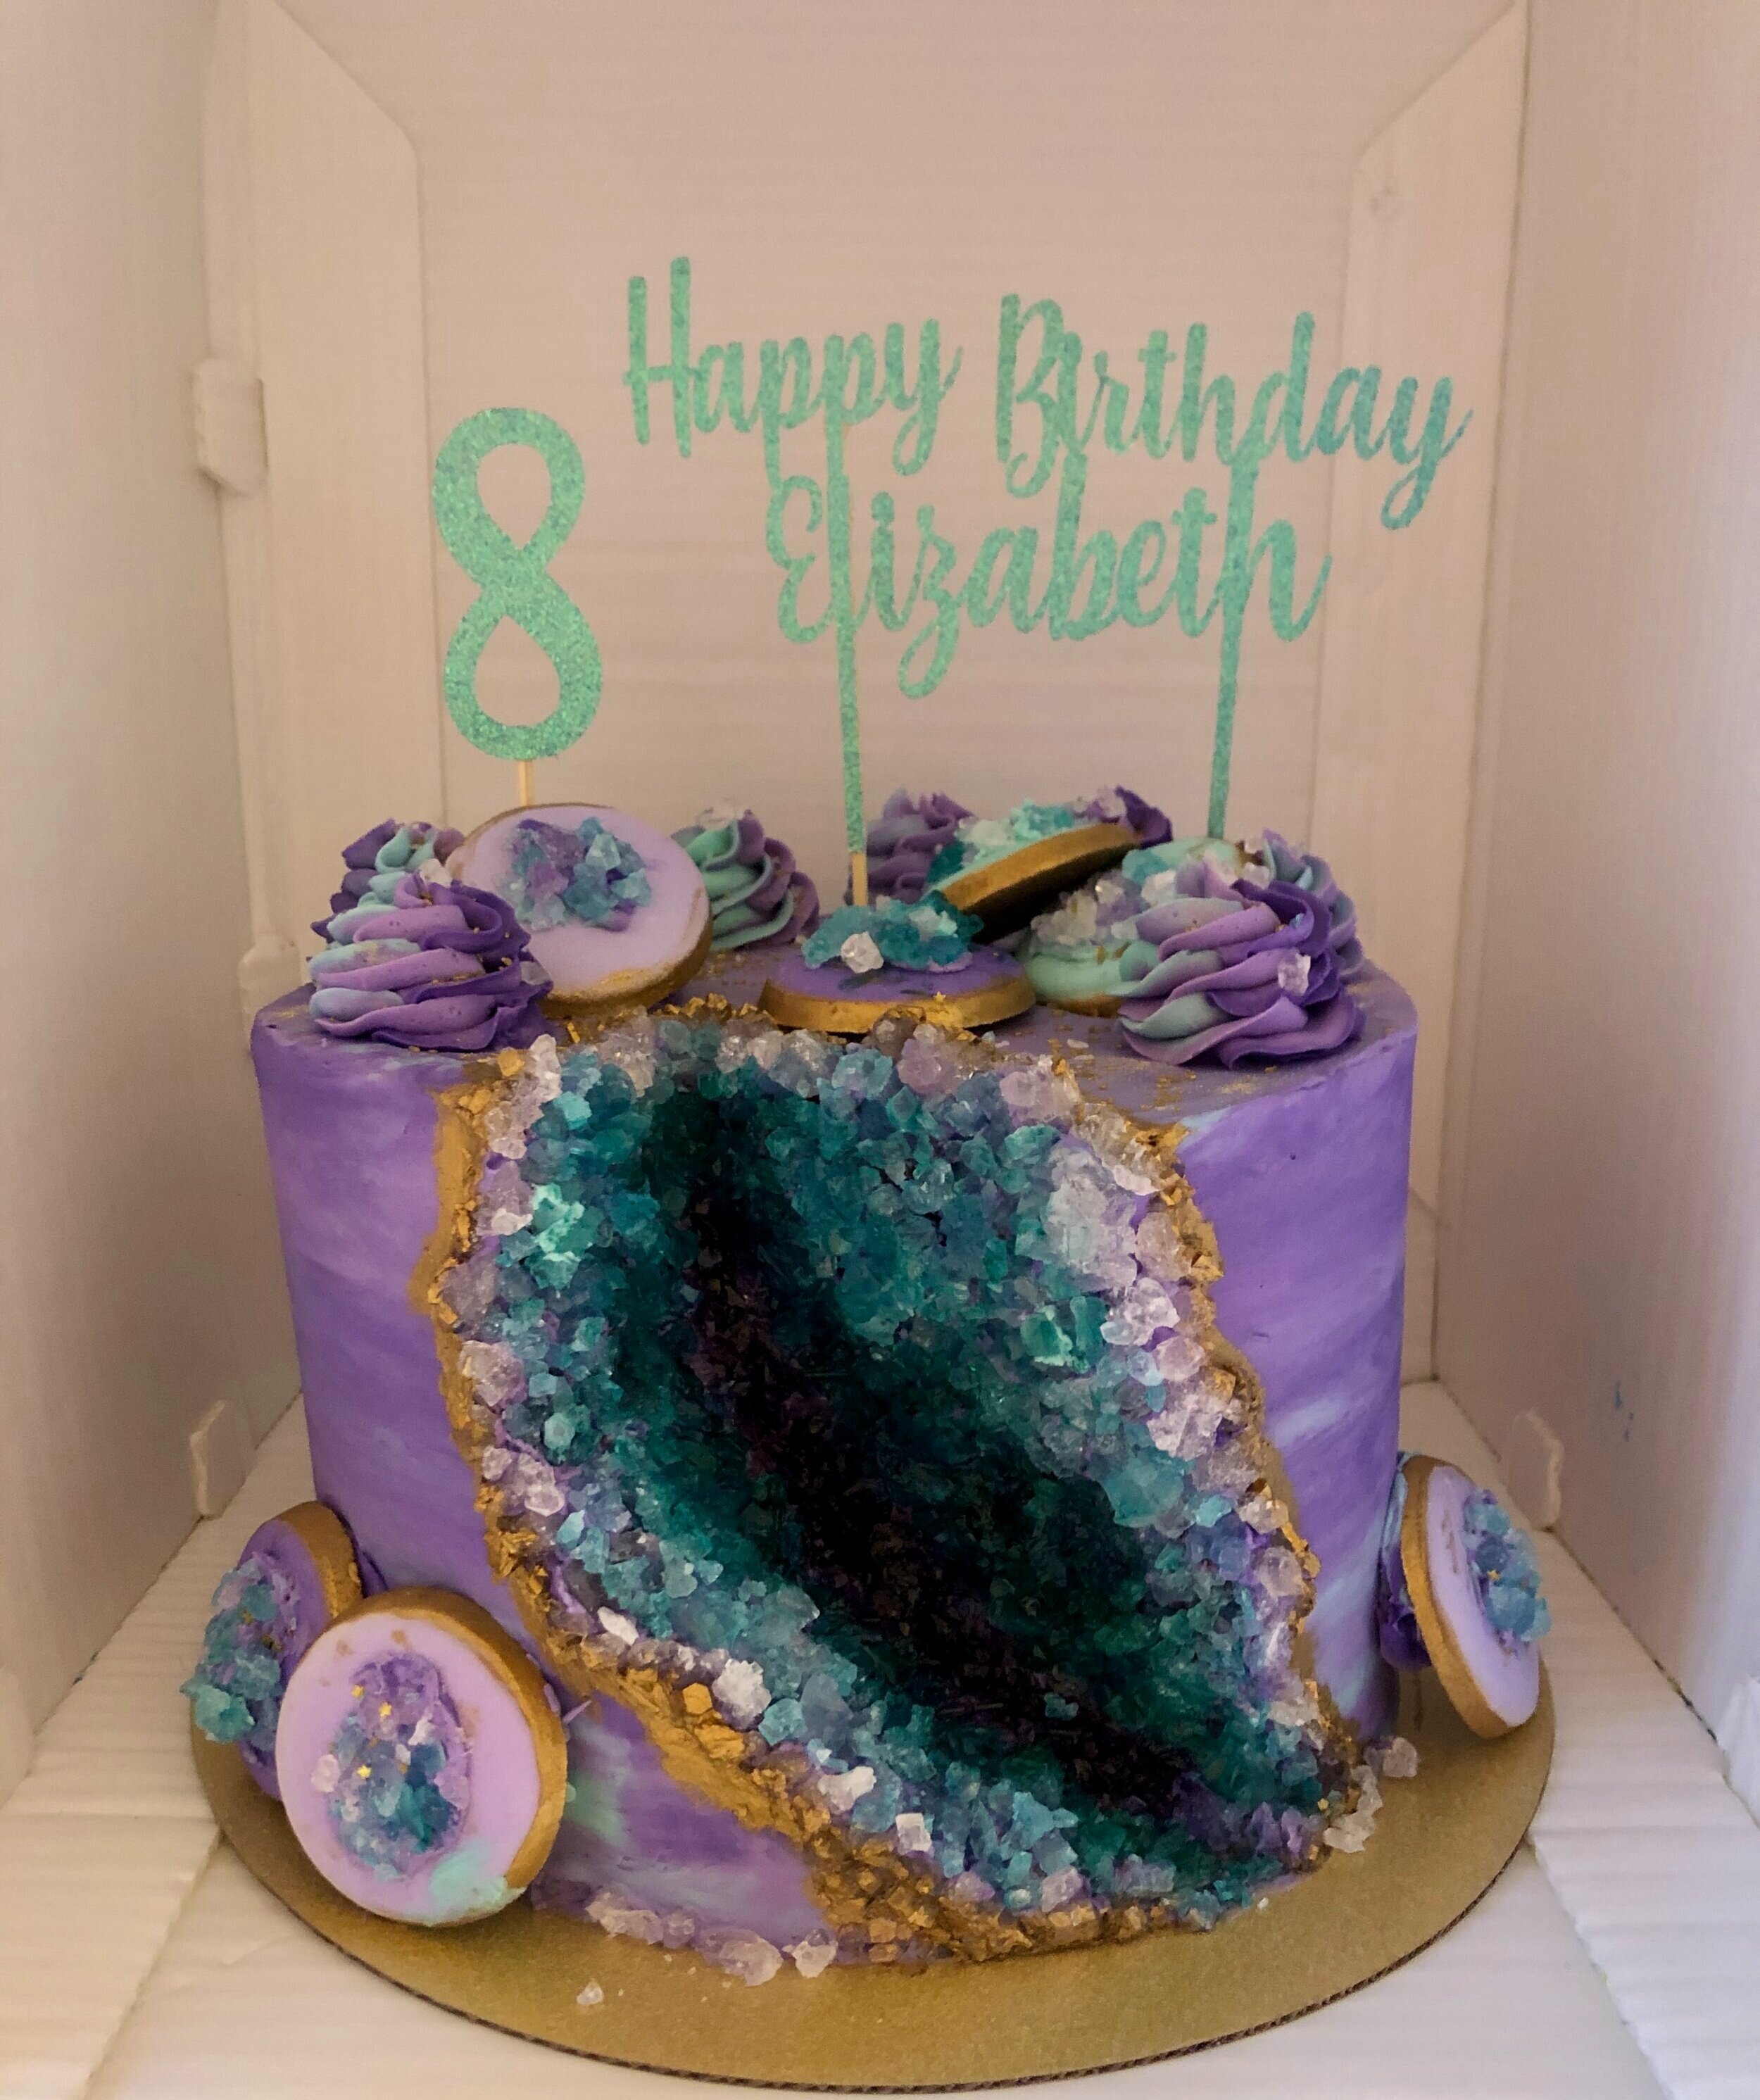 You Can Send A Vagina Geode Cake To Your Best Friends Anywhere In The US